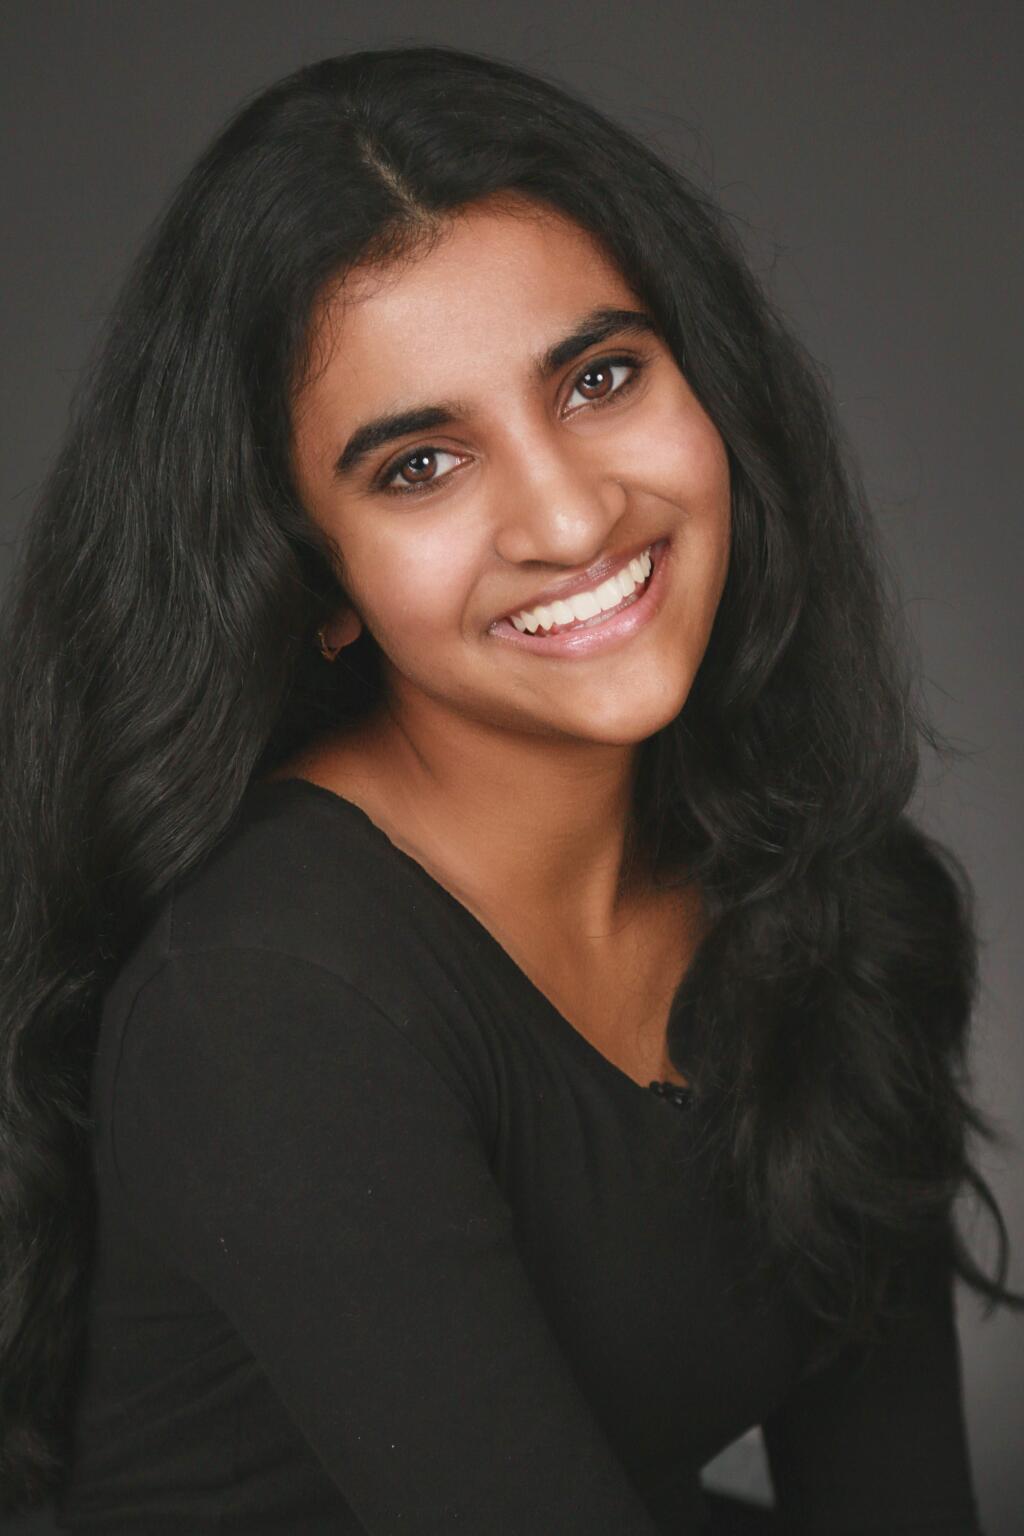 Varnika Kailash, 15, Santa Rosa, Miss Sonoma County's Outstanding Teen 2019 contestant. (Will Bucquoy/For Miss Sonoma County Scholarship Program).